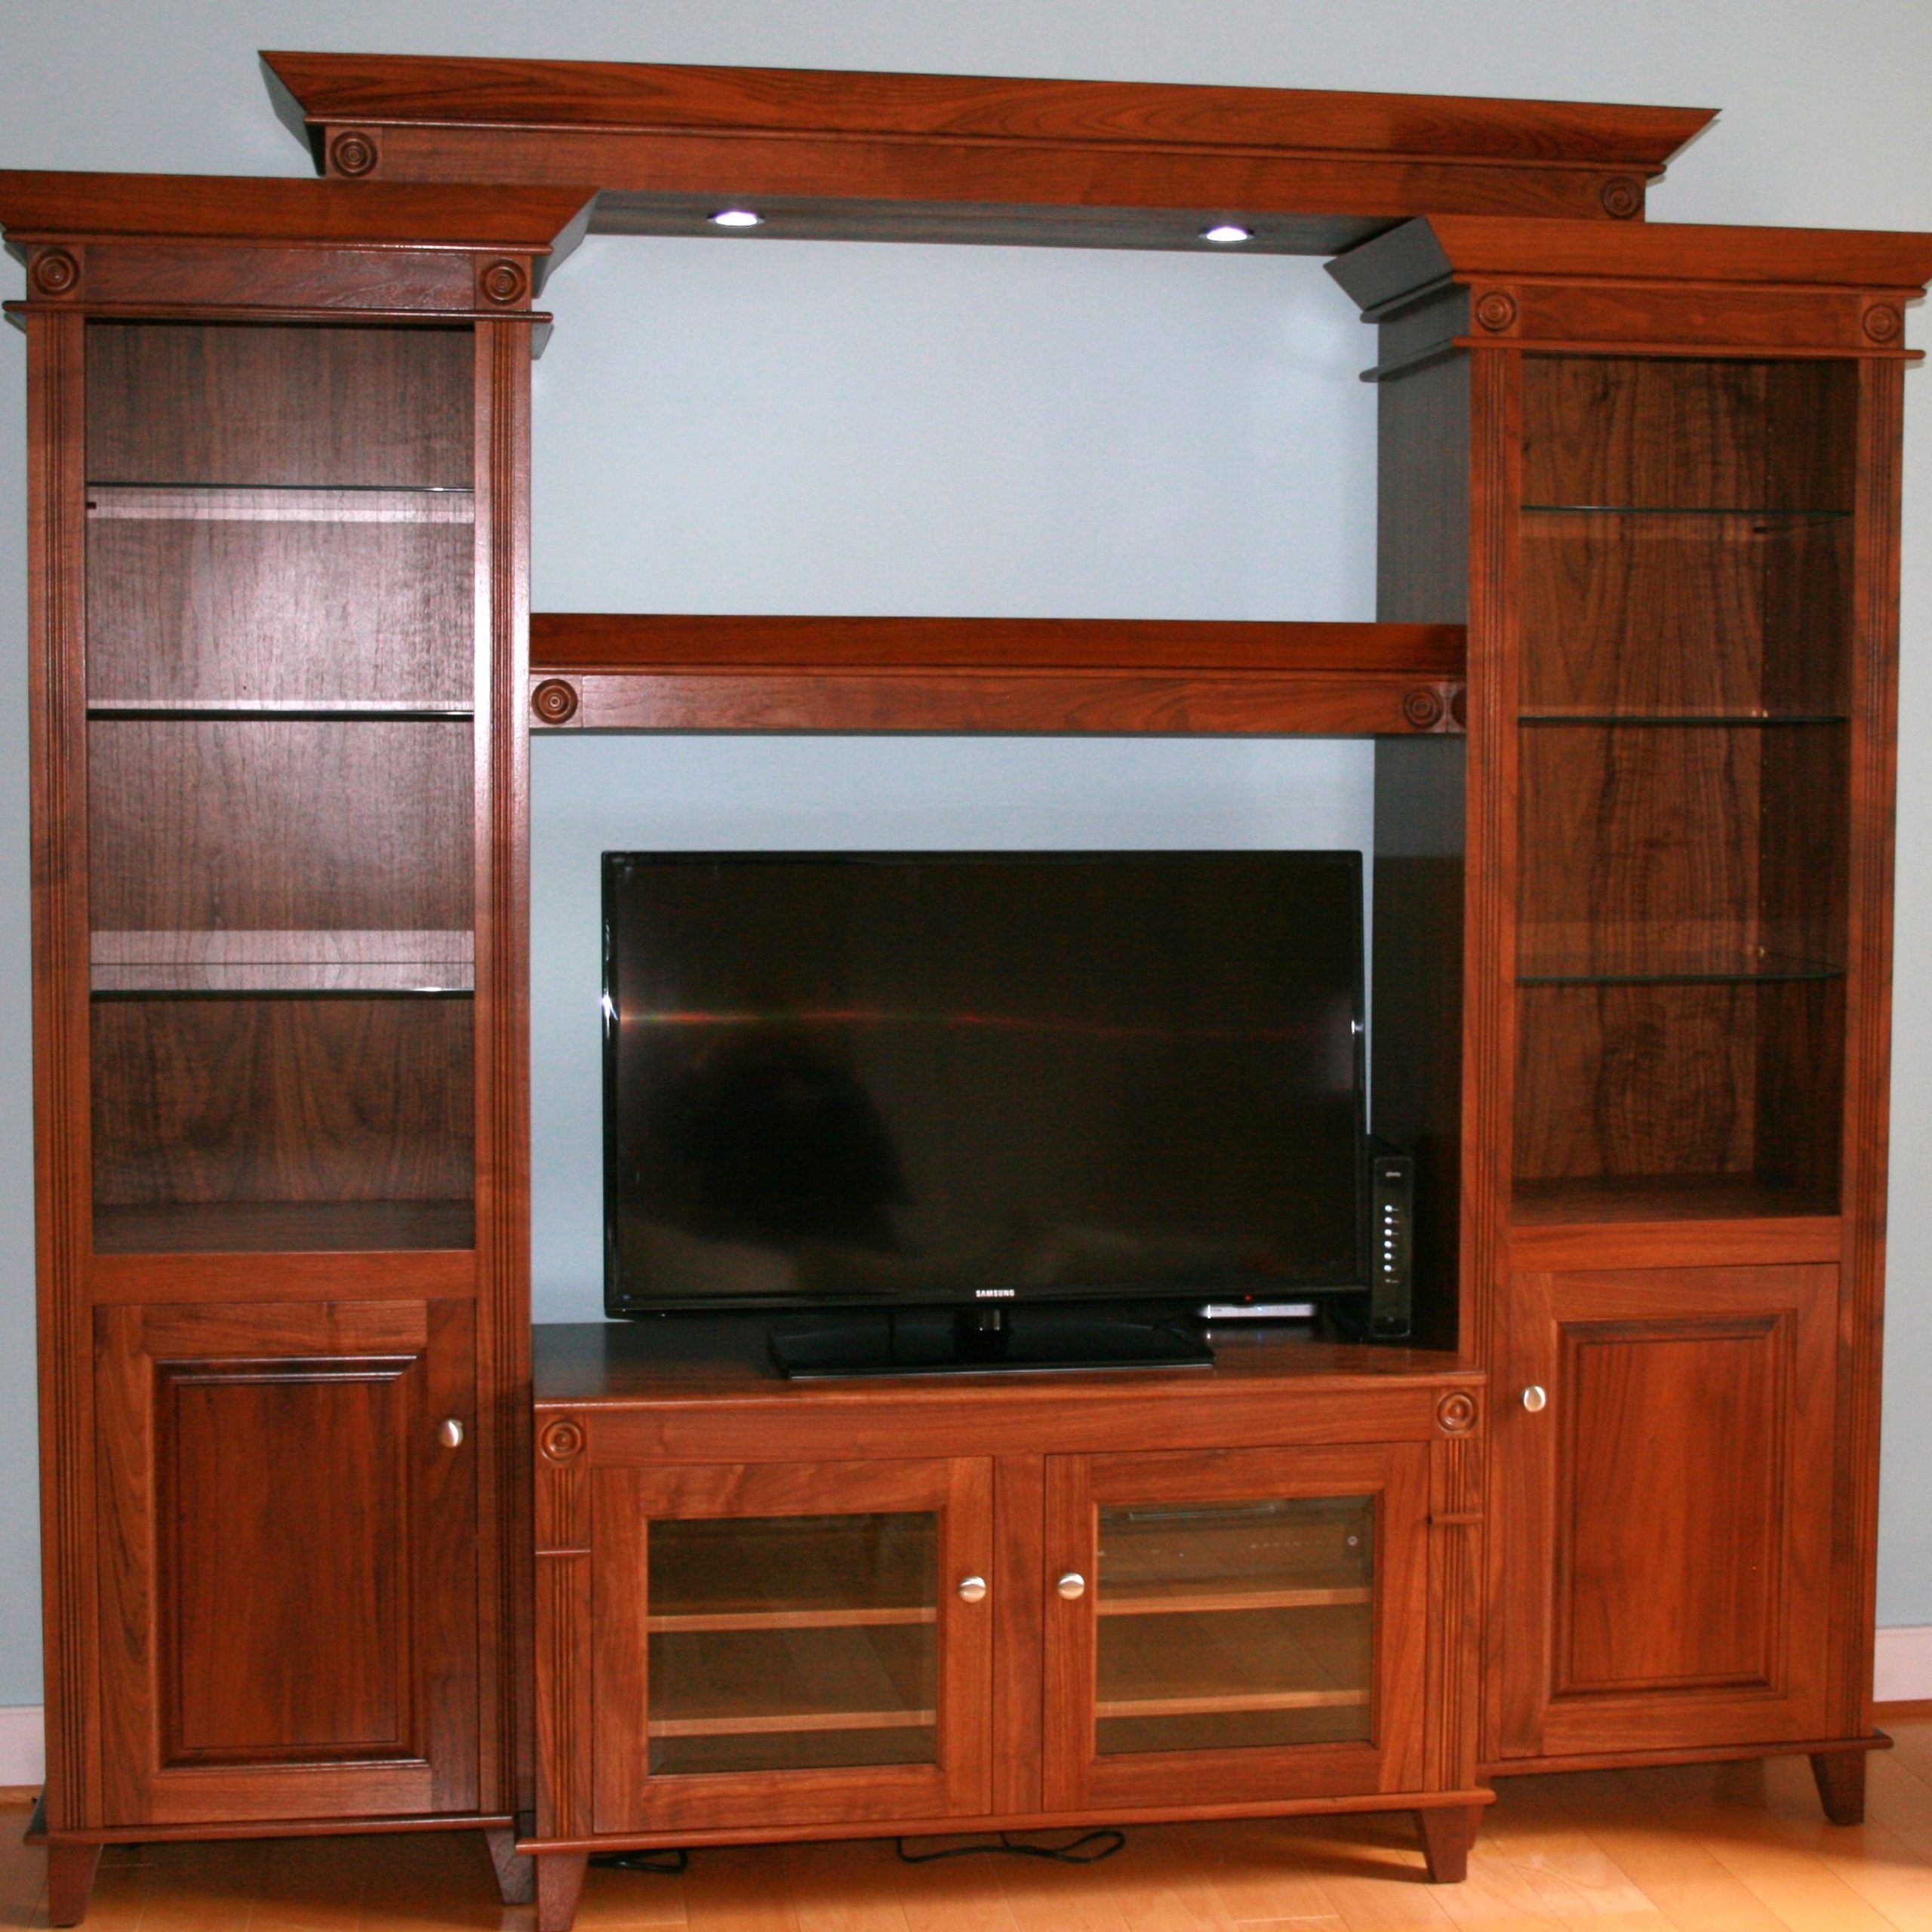 Solid Walnut Entertainment Center Intended For Walnut Entertainment Centers (Gallery 8 of 20)